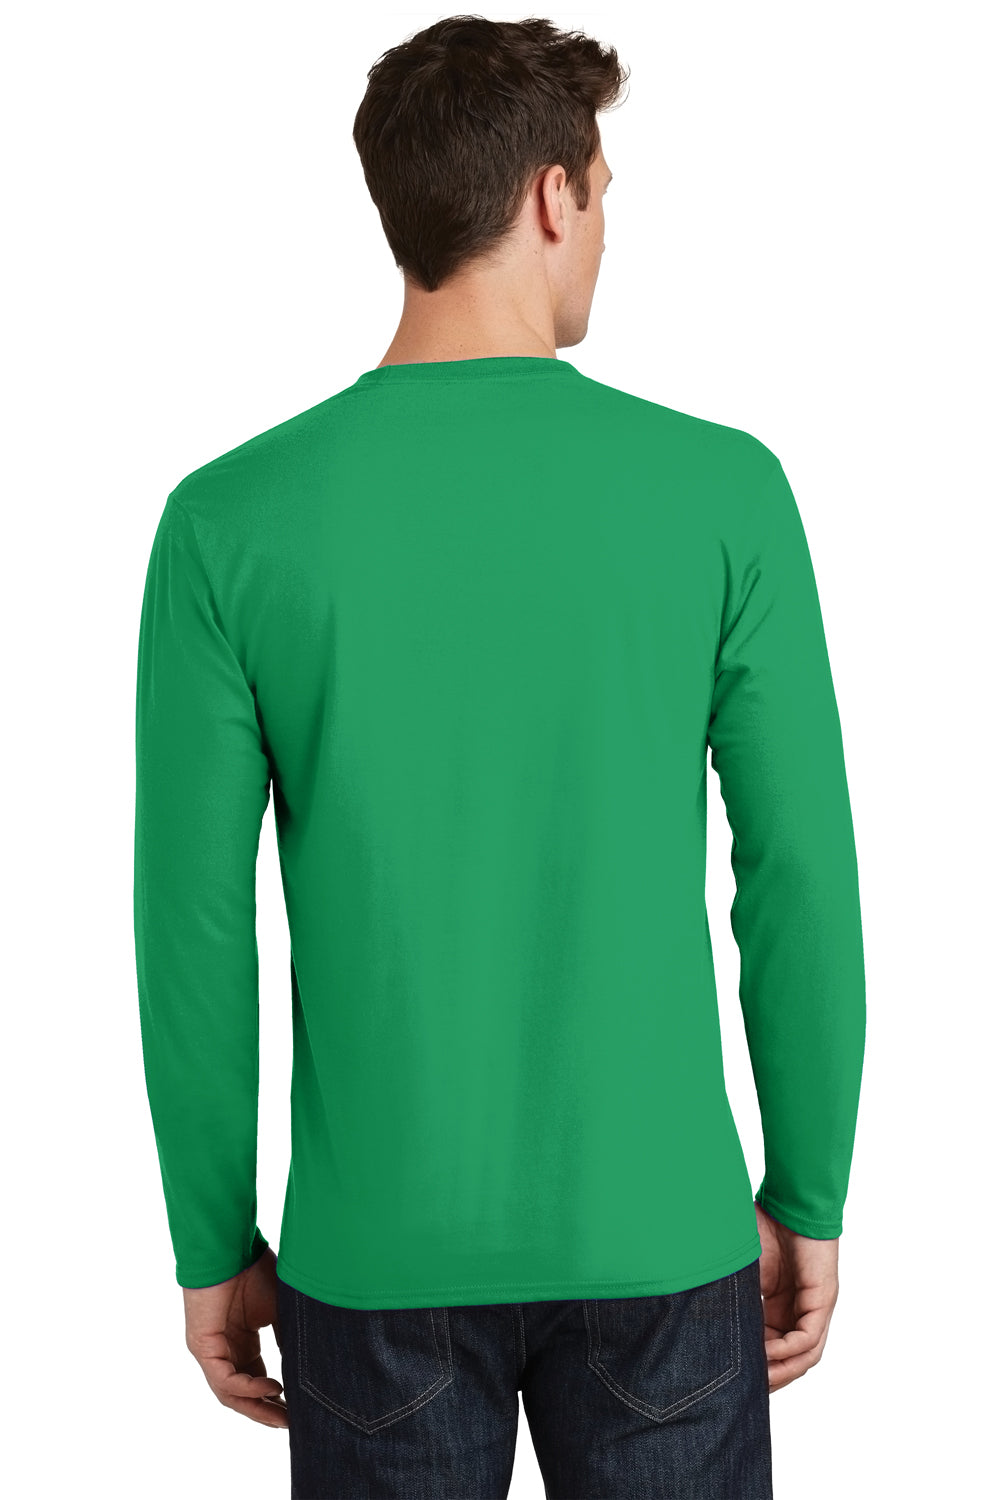 Steagles Retro Long Sleeve T-Shirt  Phil-Pitt Steagles Kelly Green Lo –  Broad and Market